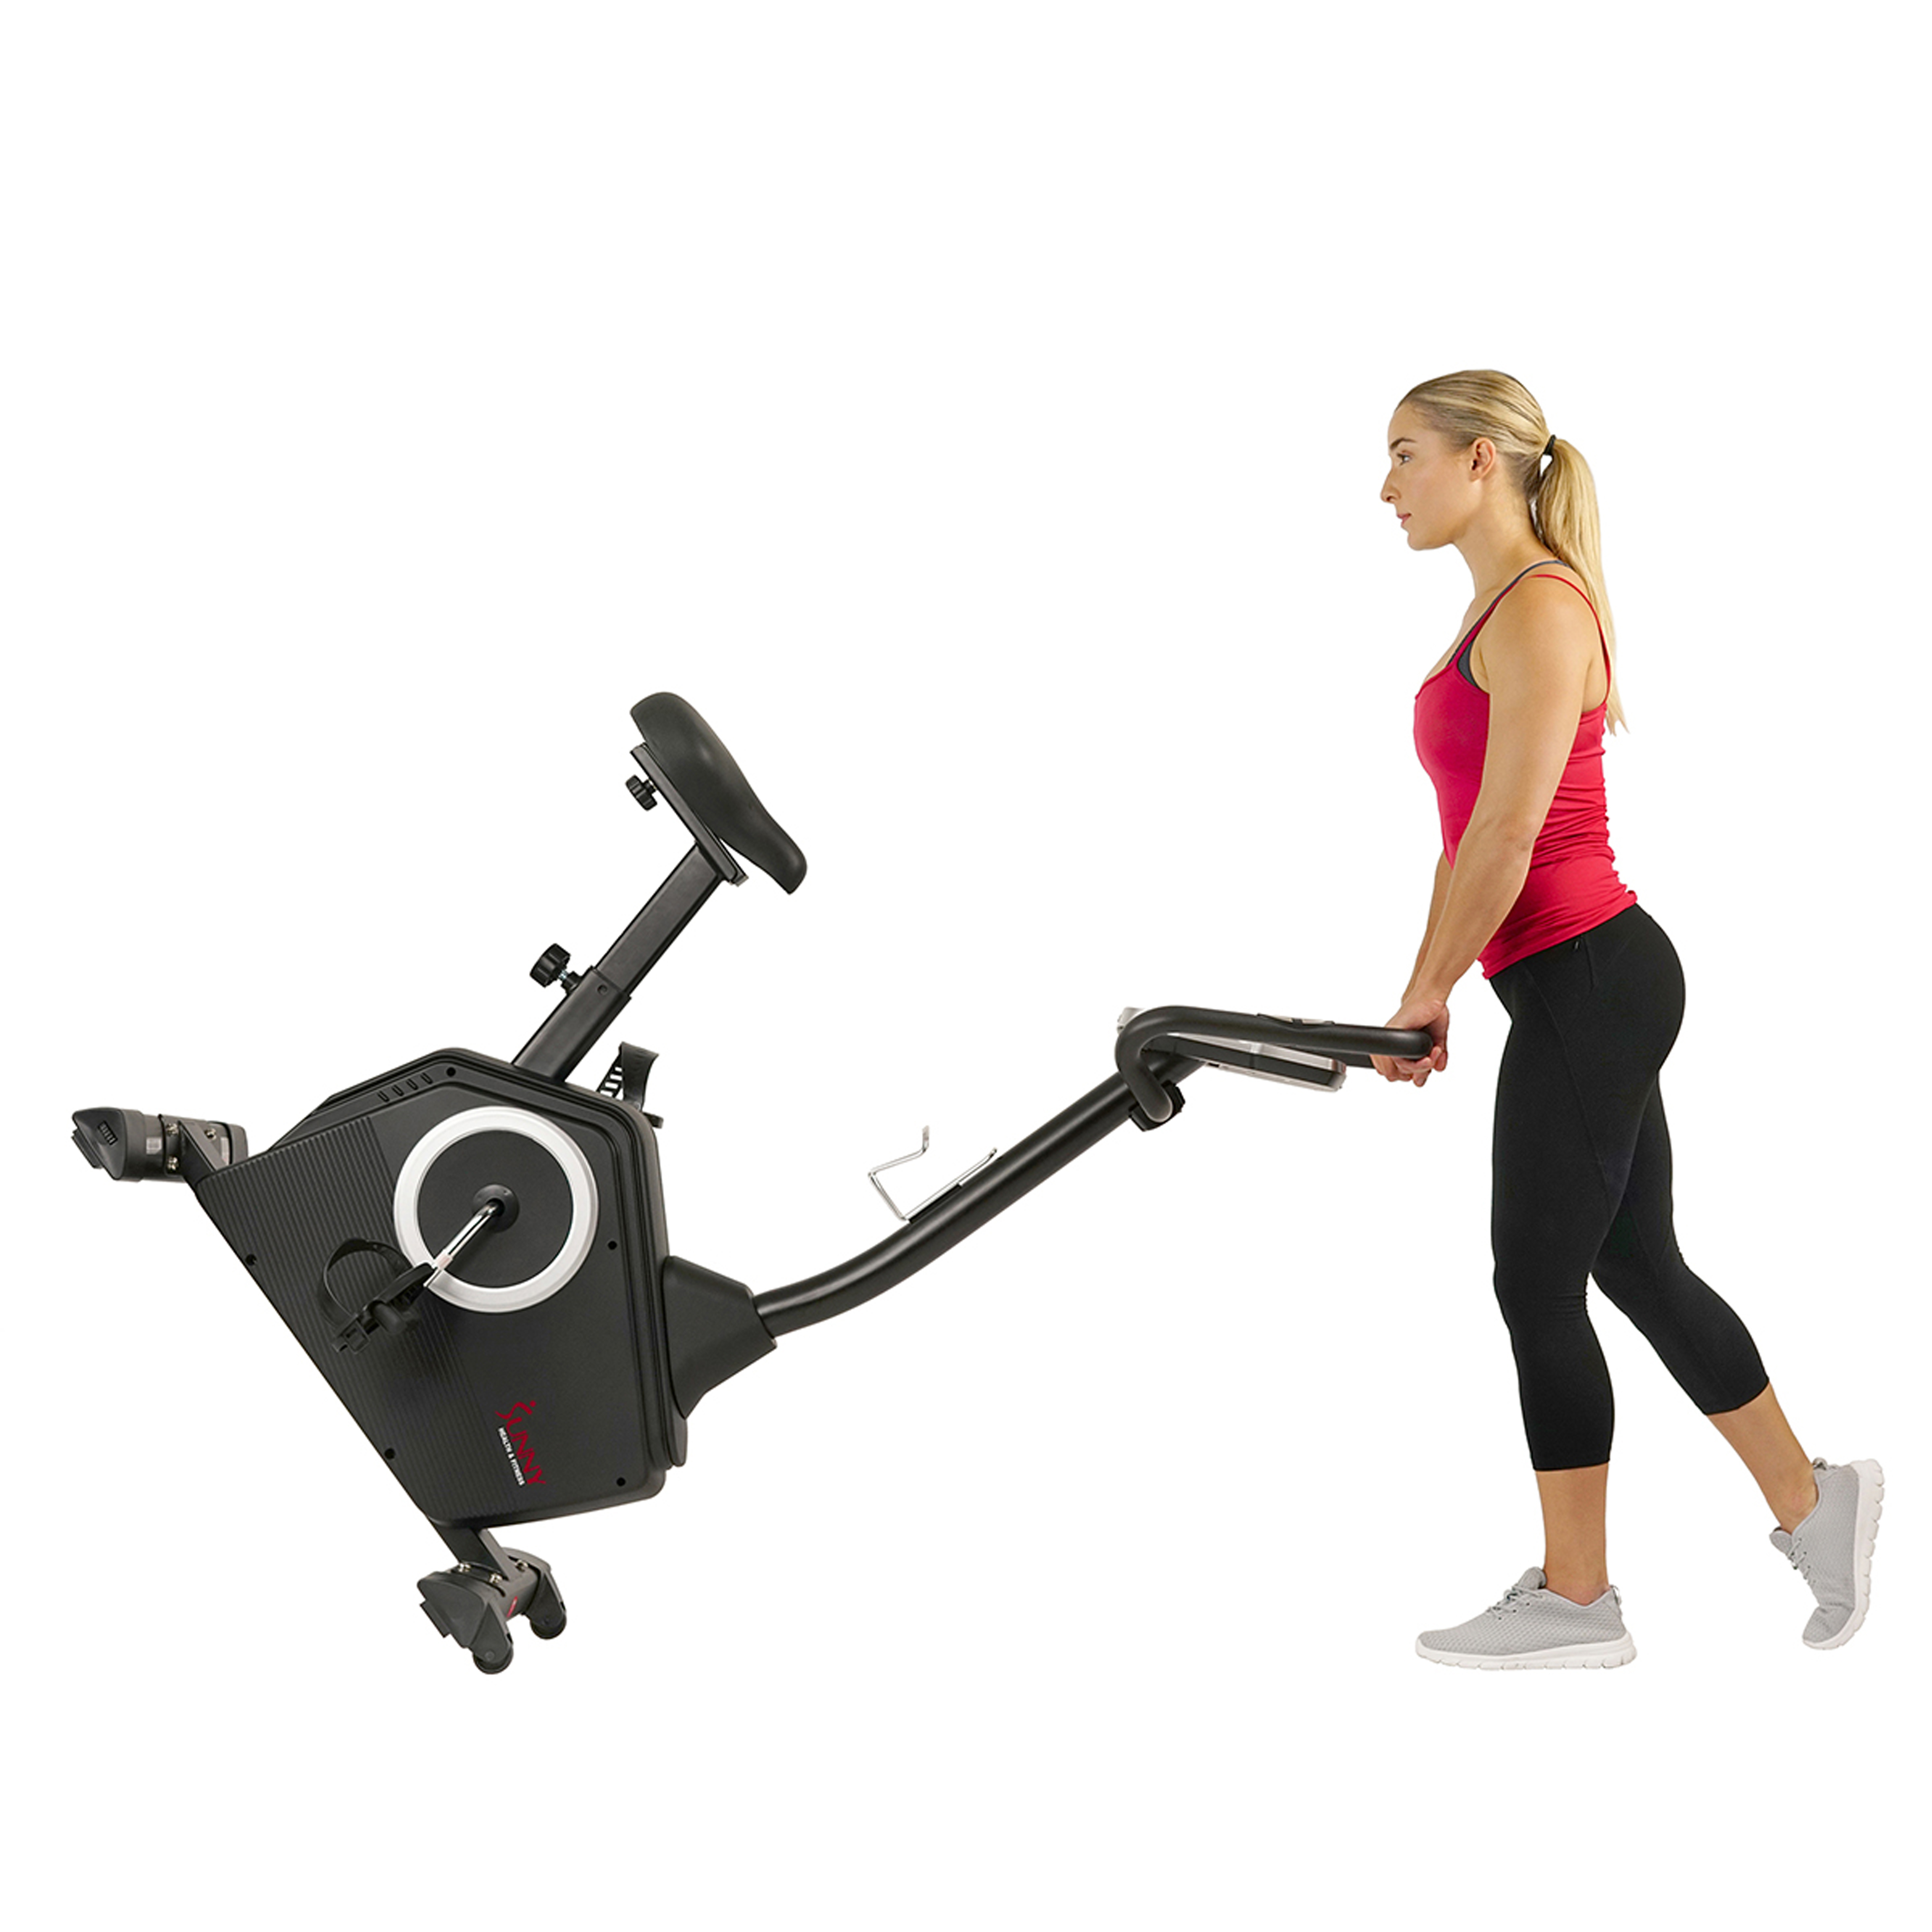 Sunny Health & Fitness Magnetic Upright Exercise Bike w/ LCD, Pulse Monitor, Stationary Cycling and Indoor Home Workouts SF-B2883 - image 3 of 9